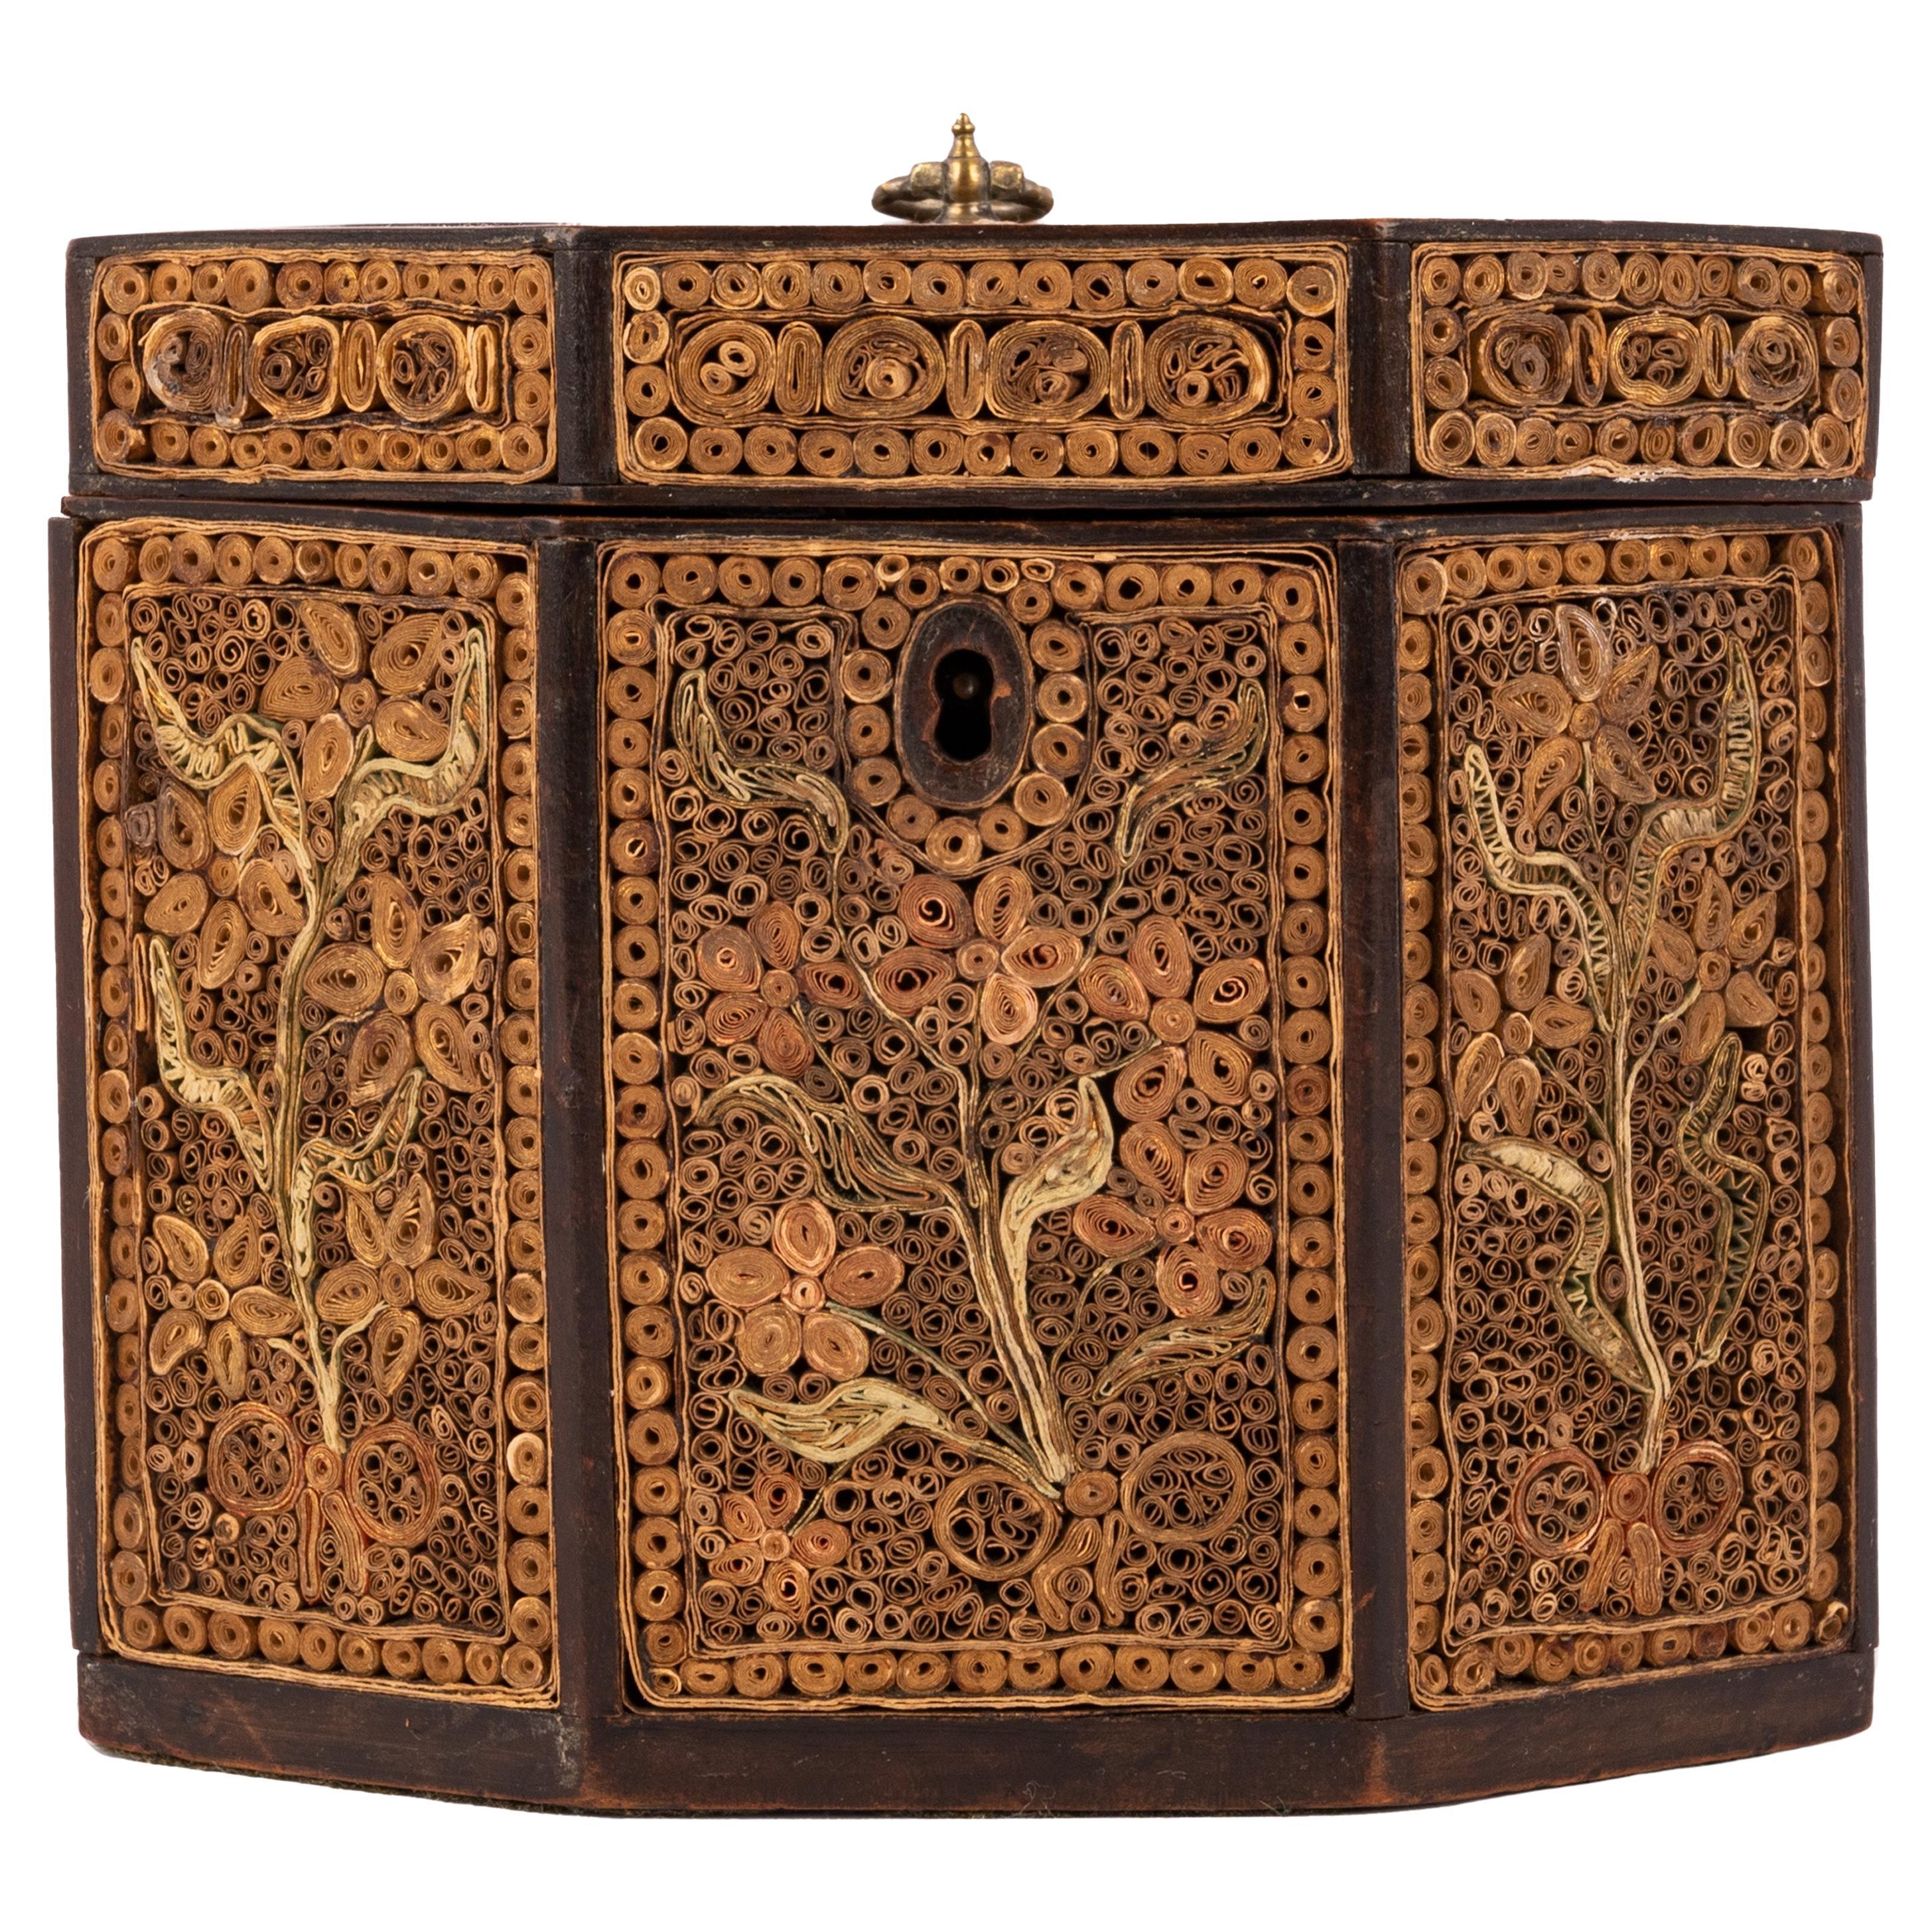 A good antique Georgian scrollwork tea caddy, circa 1780.
An octagonal shaped paper scroll tea caddy, the front, back and cover decorated overall with paper scrolls in stylized floral and foliate motifs. The caddy having a hinged lid with an